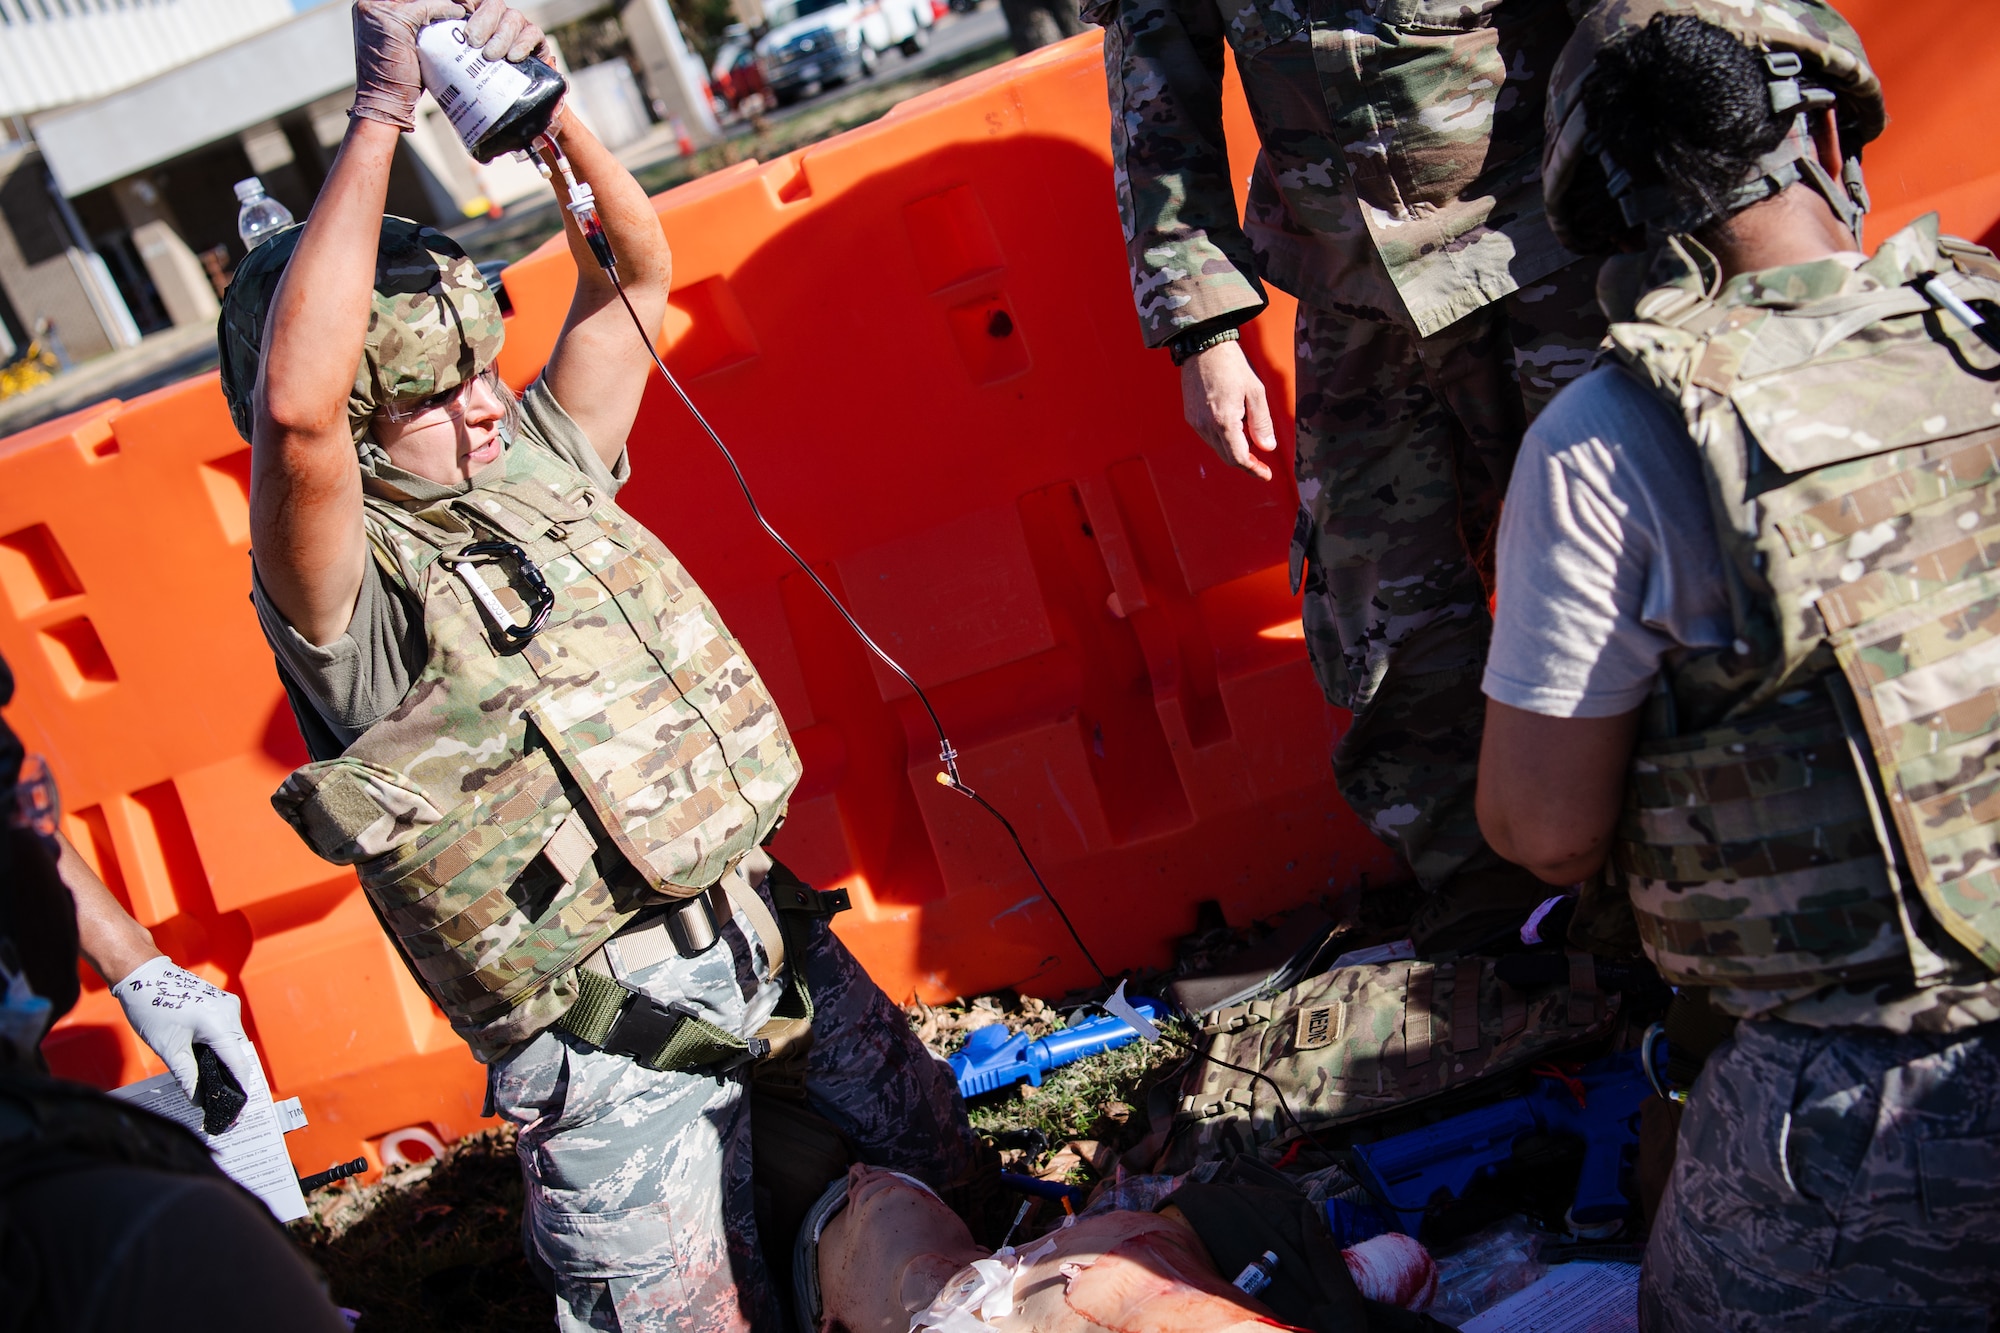 Staff Sgt. Johanna Esquivel, left, 2nd Operational Medical Readiness Squadron medical technician, provides tactical field care to a training dummy during a Tactical Combat Casualty Care (TCCC) field training exercise at Barksdale Air Force Base, La., Dec. 9, 2020.